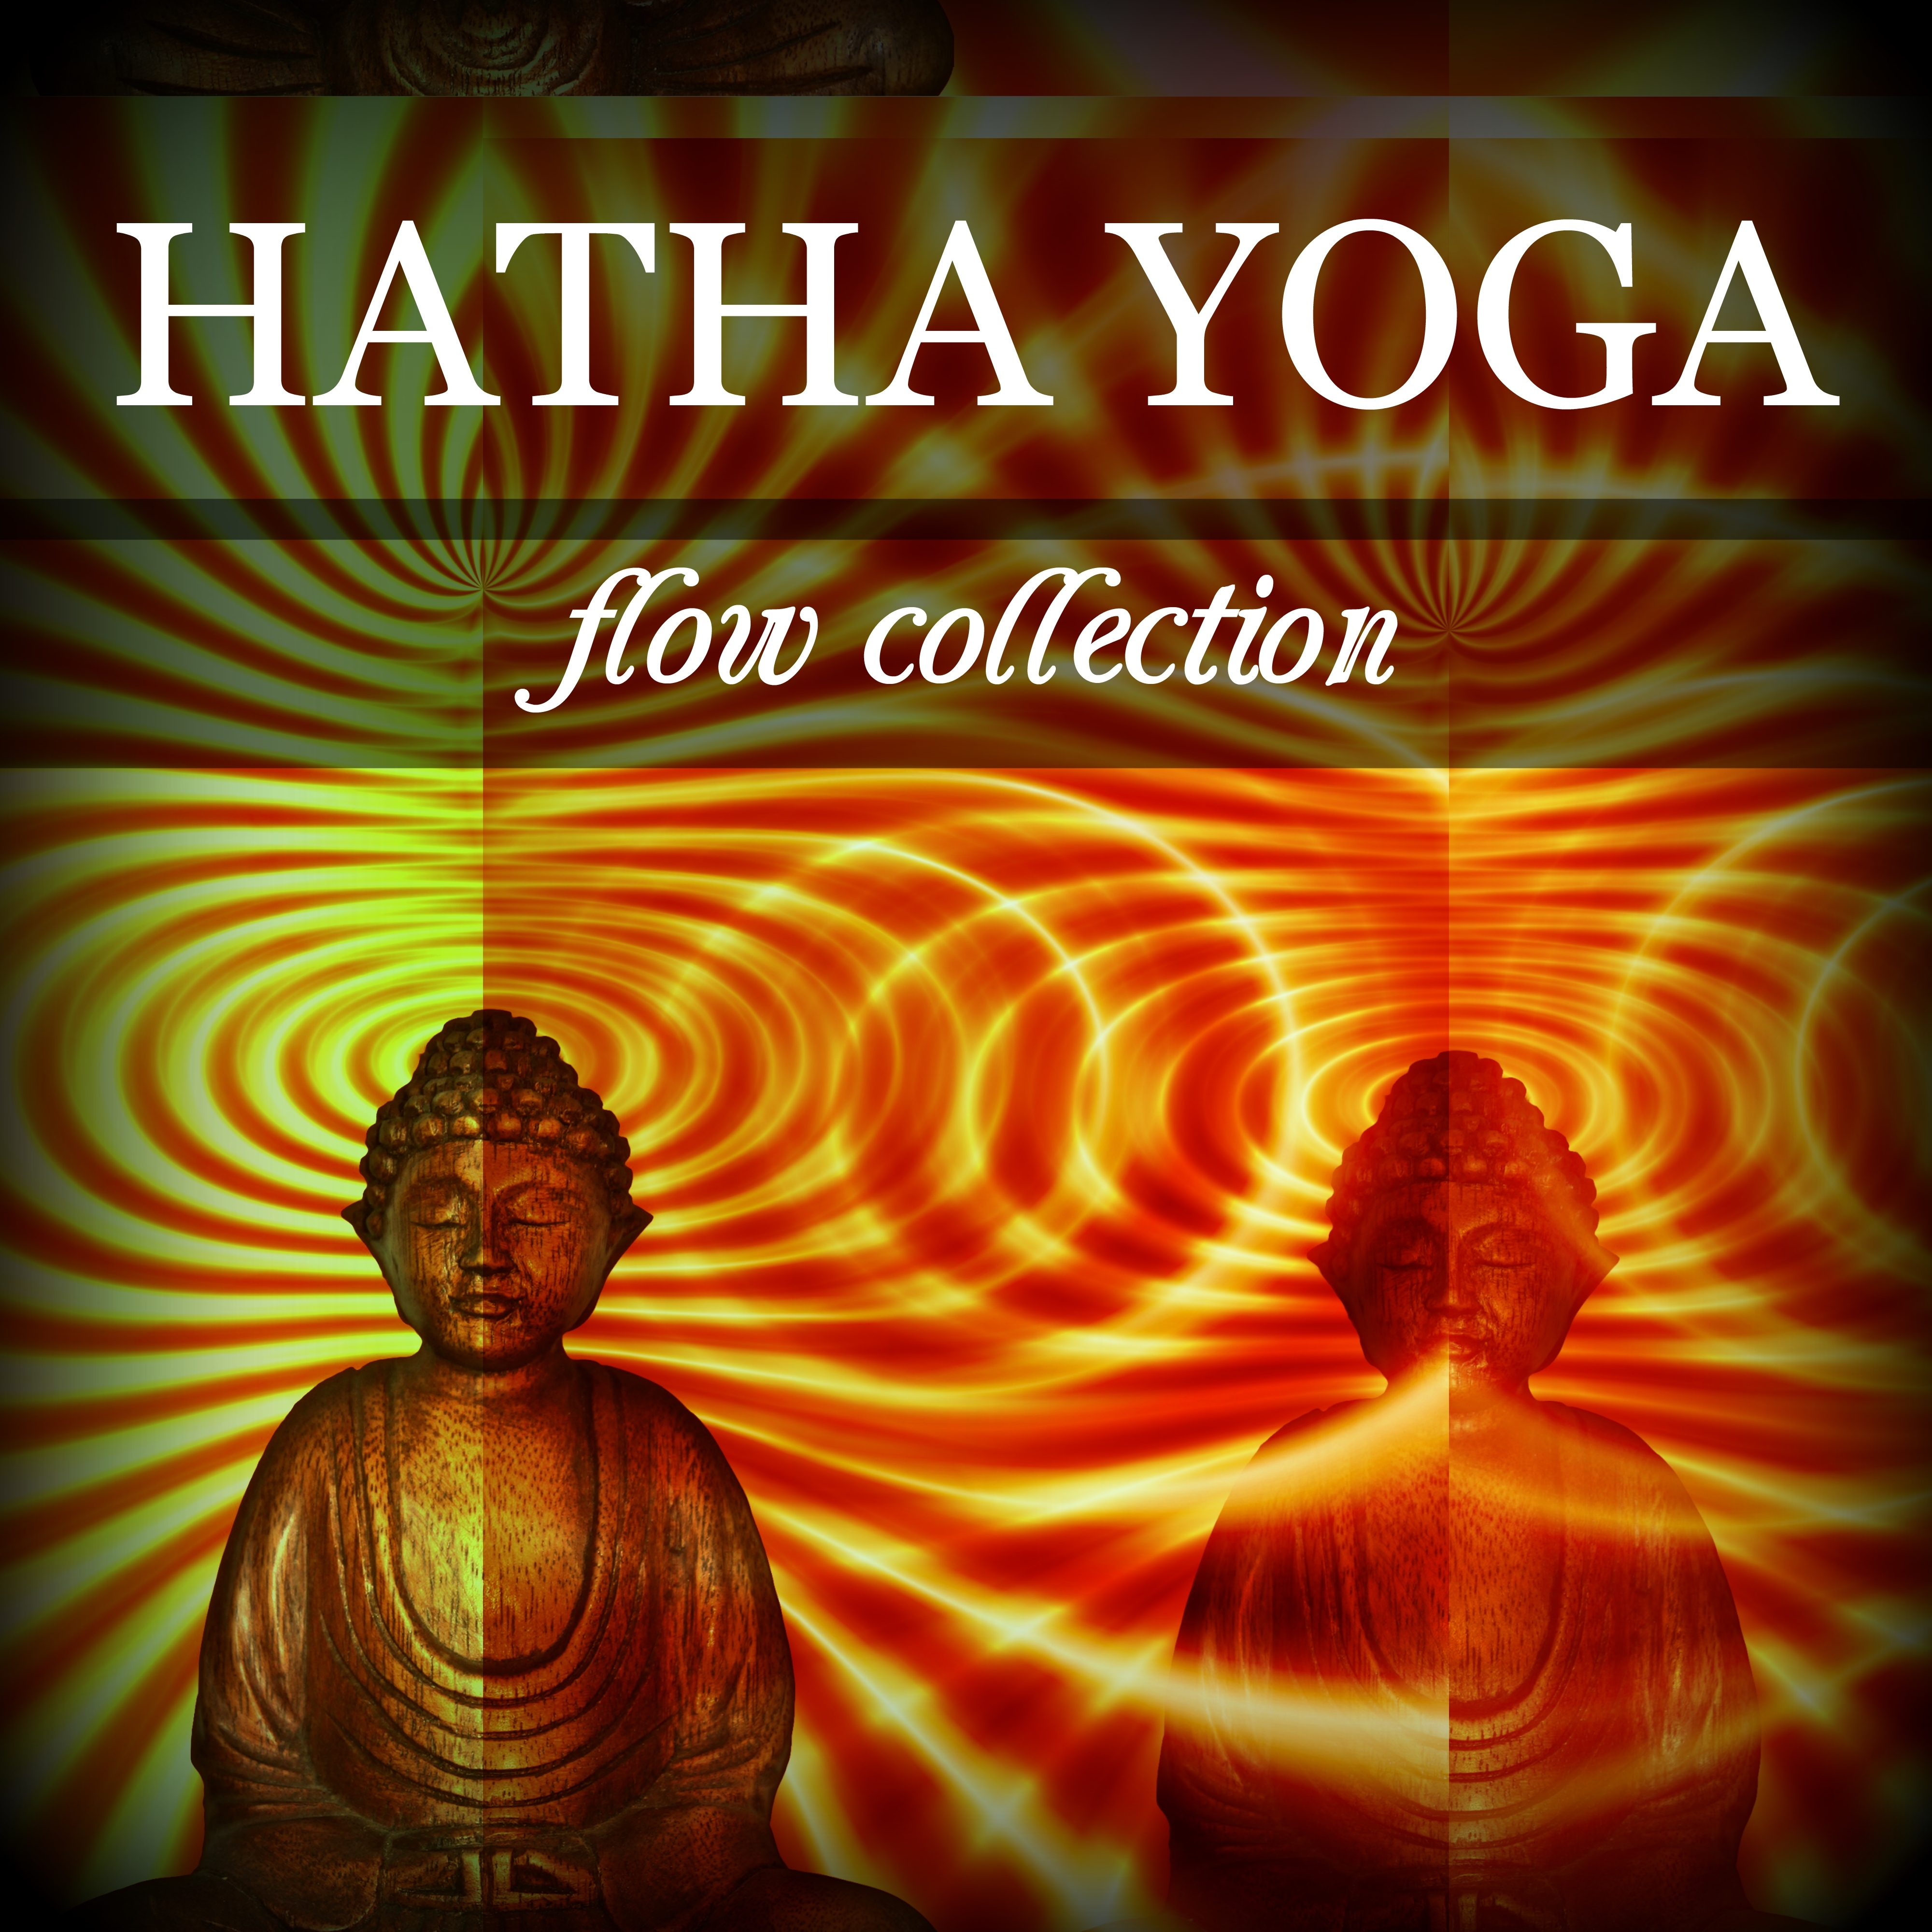 Hatha Yoga Flow Collection - Best Music Playlist to Improve Mindfulness, Balance, Flexibility and Strength